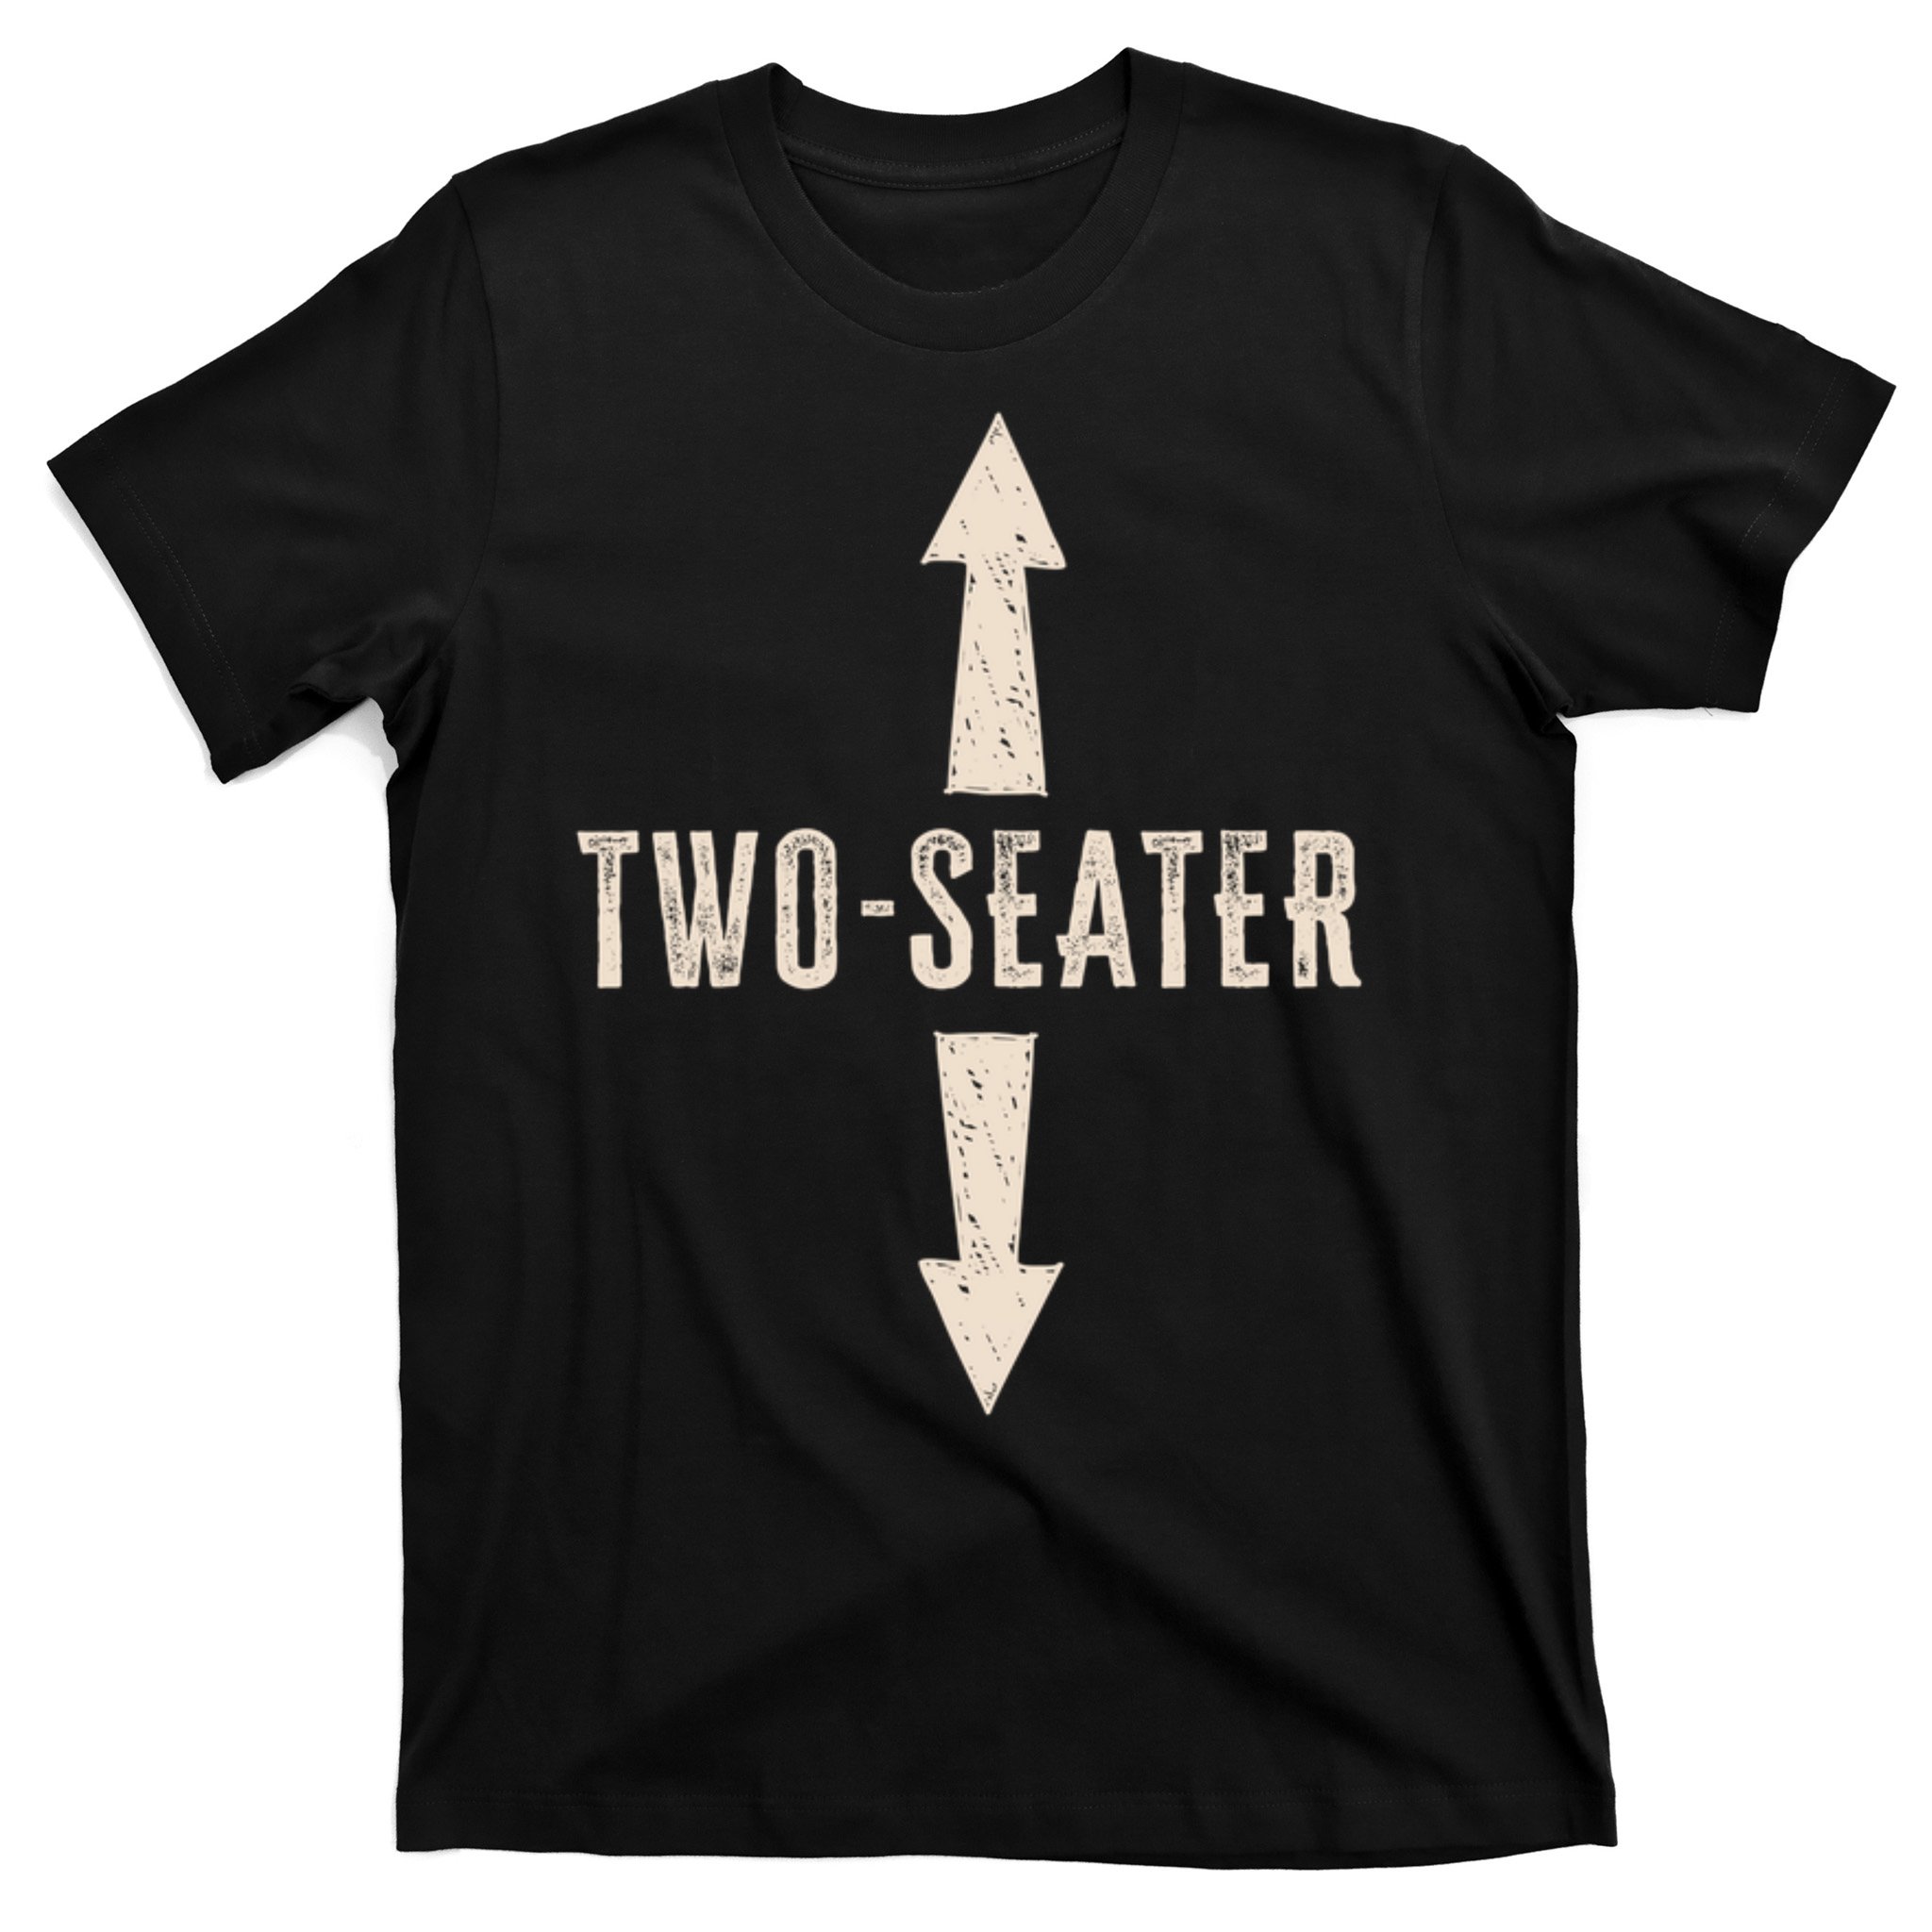 Two Seater Funny Adult Humor Popular Hilarious Quote T-Shirt ...